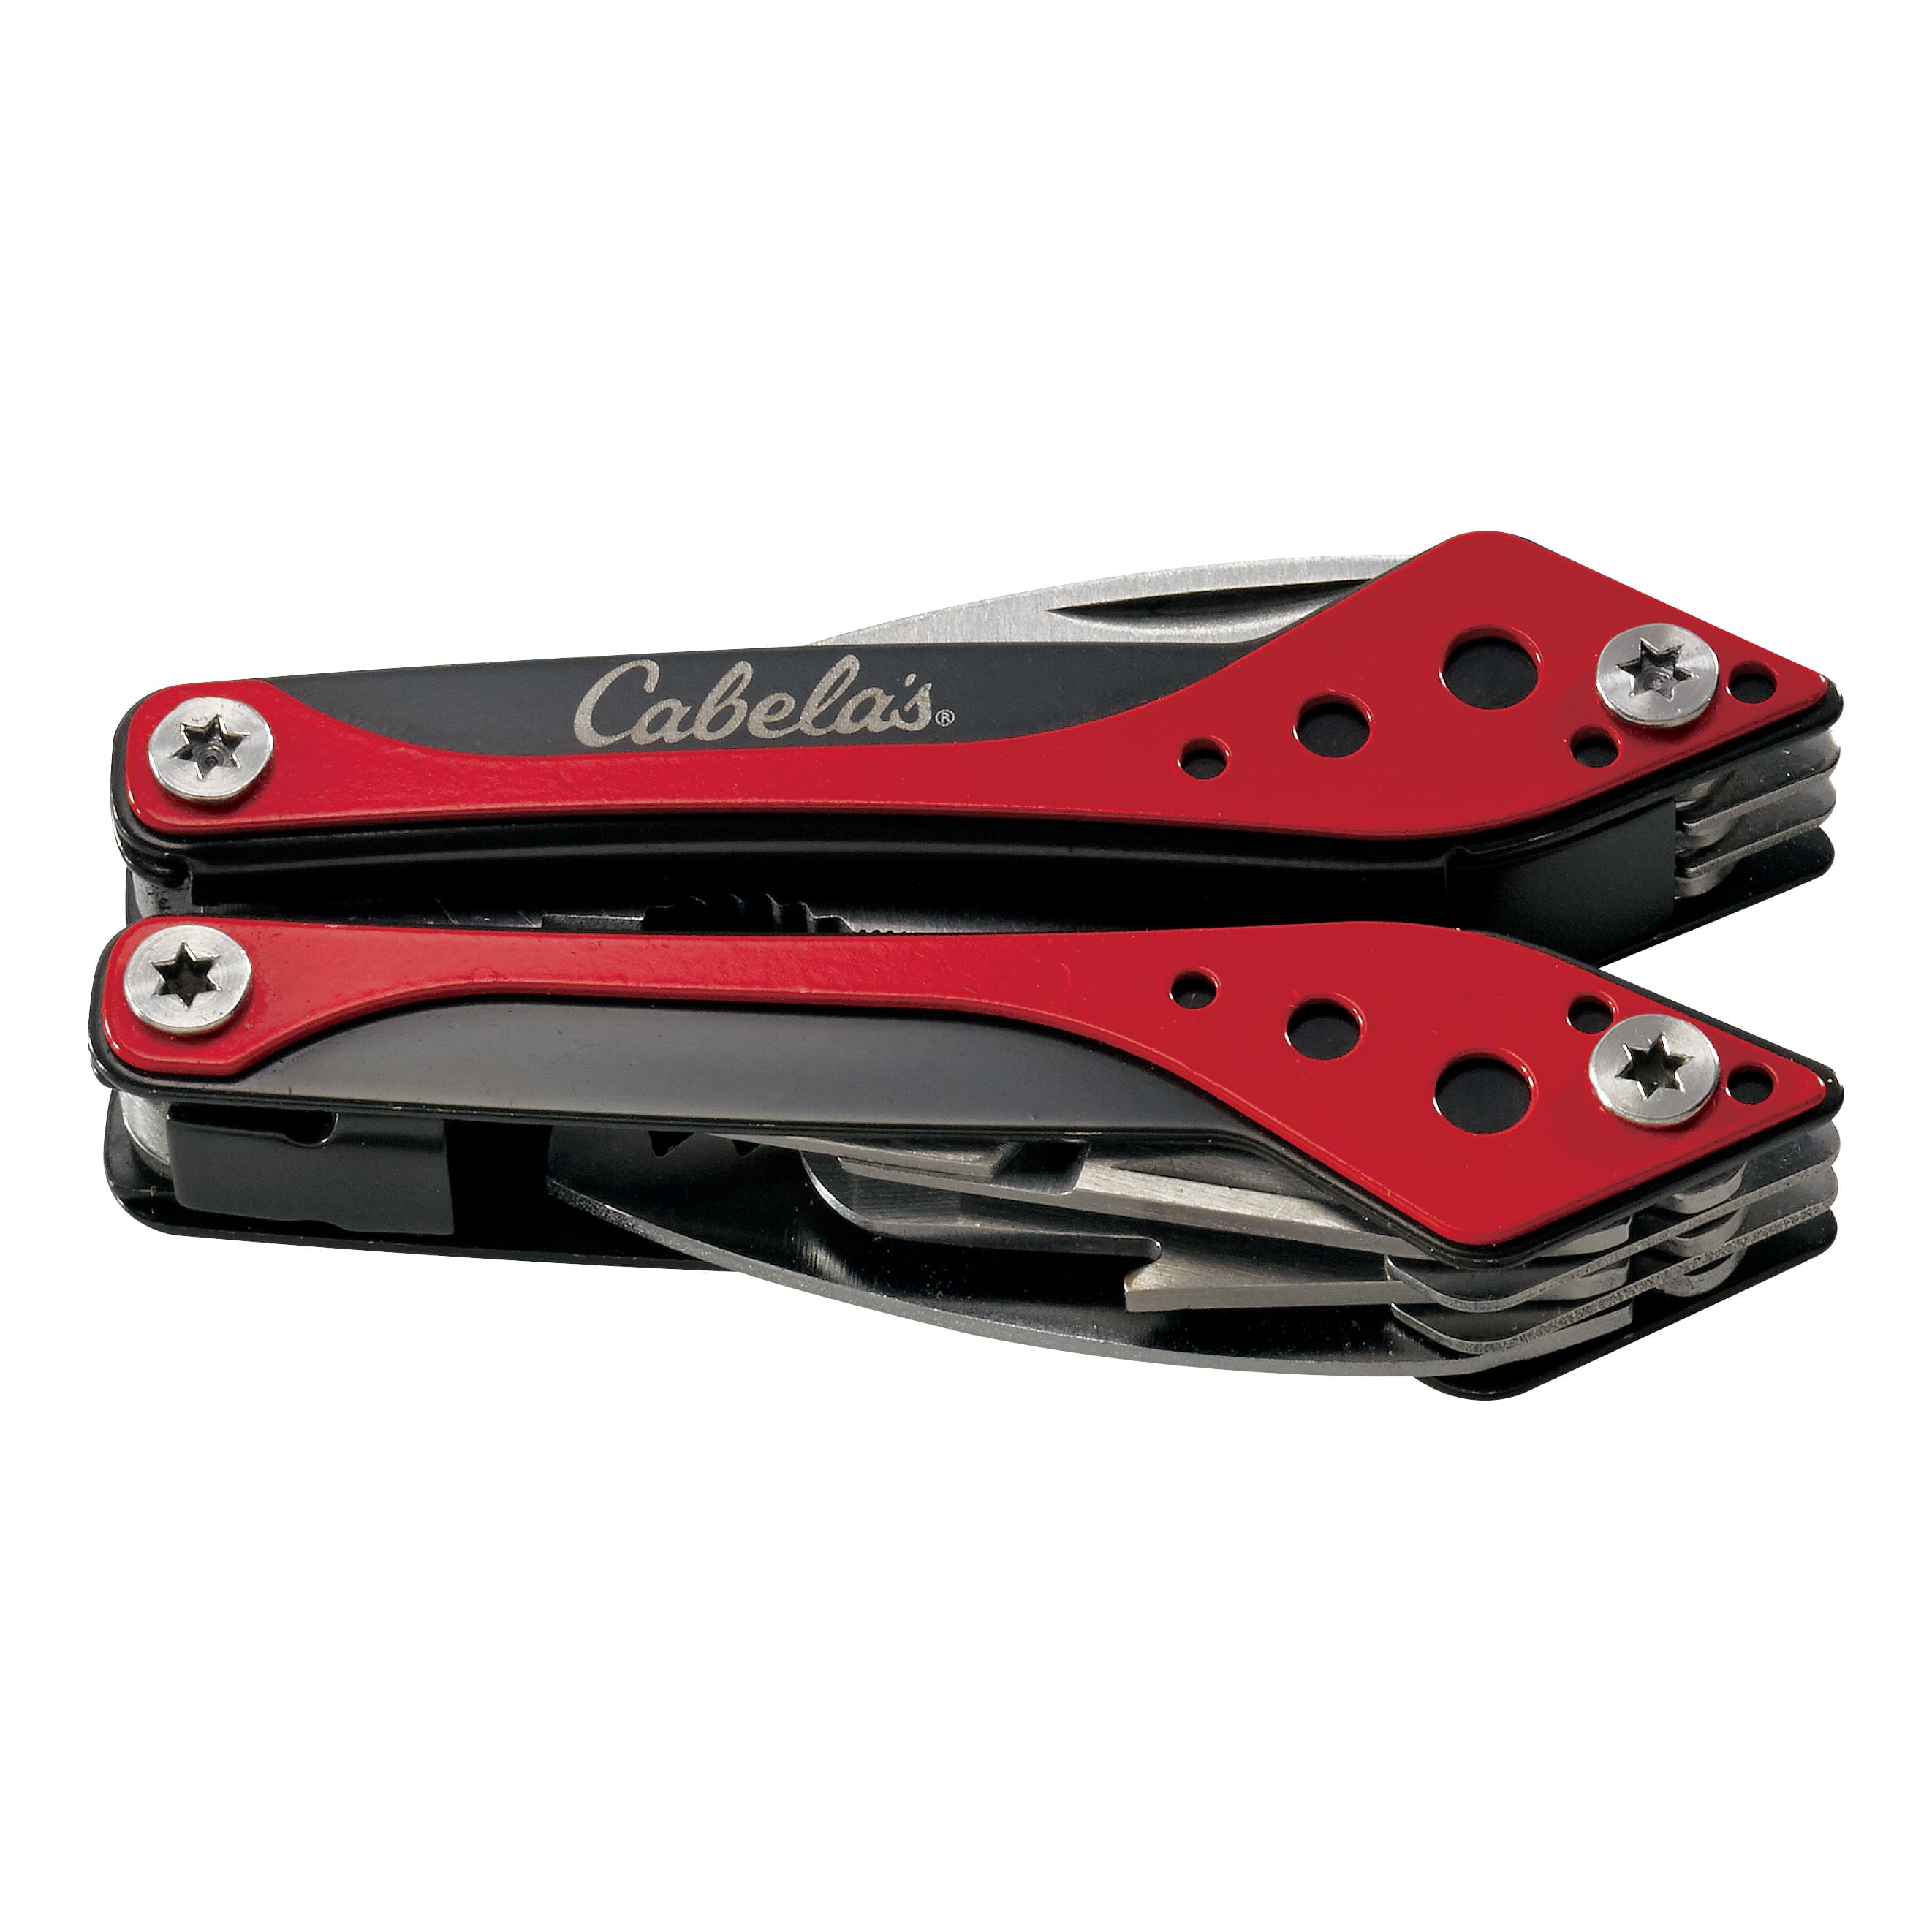 Cabela's Multitool - Red - Closed View